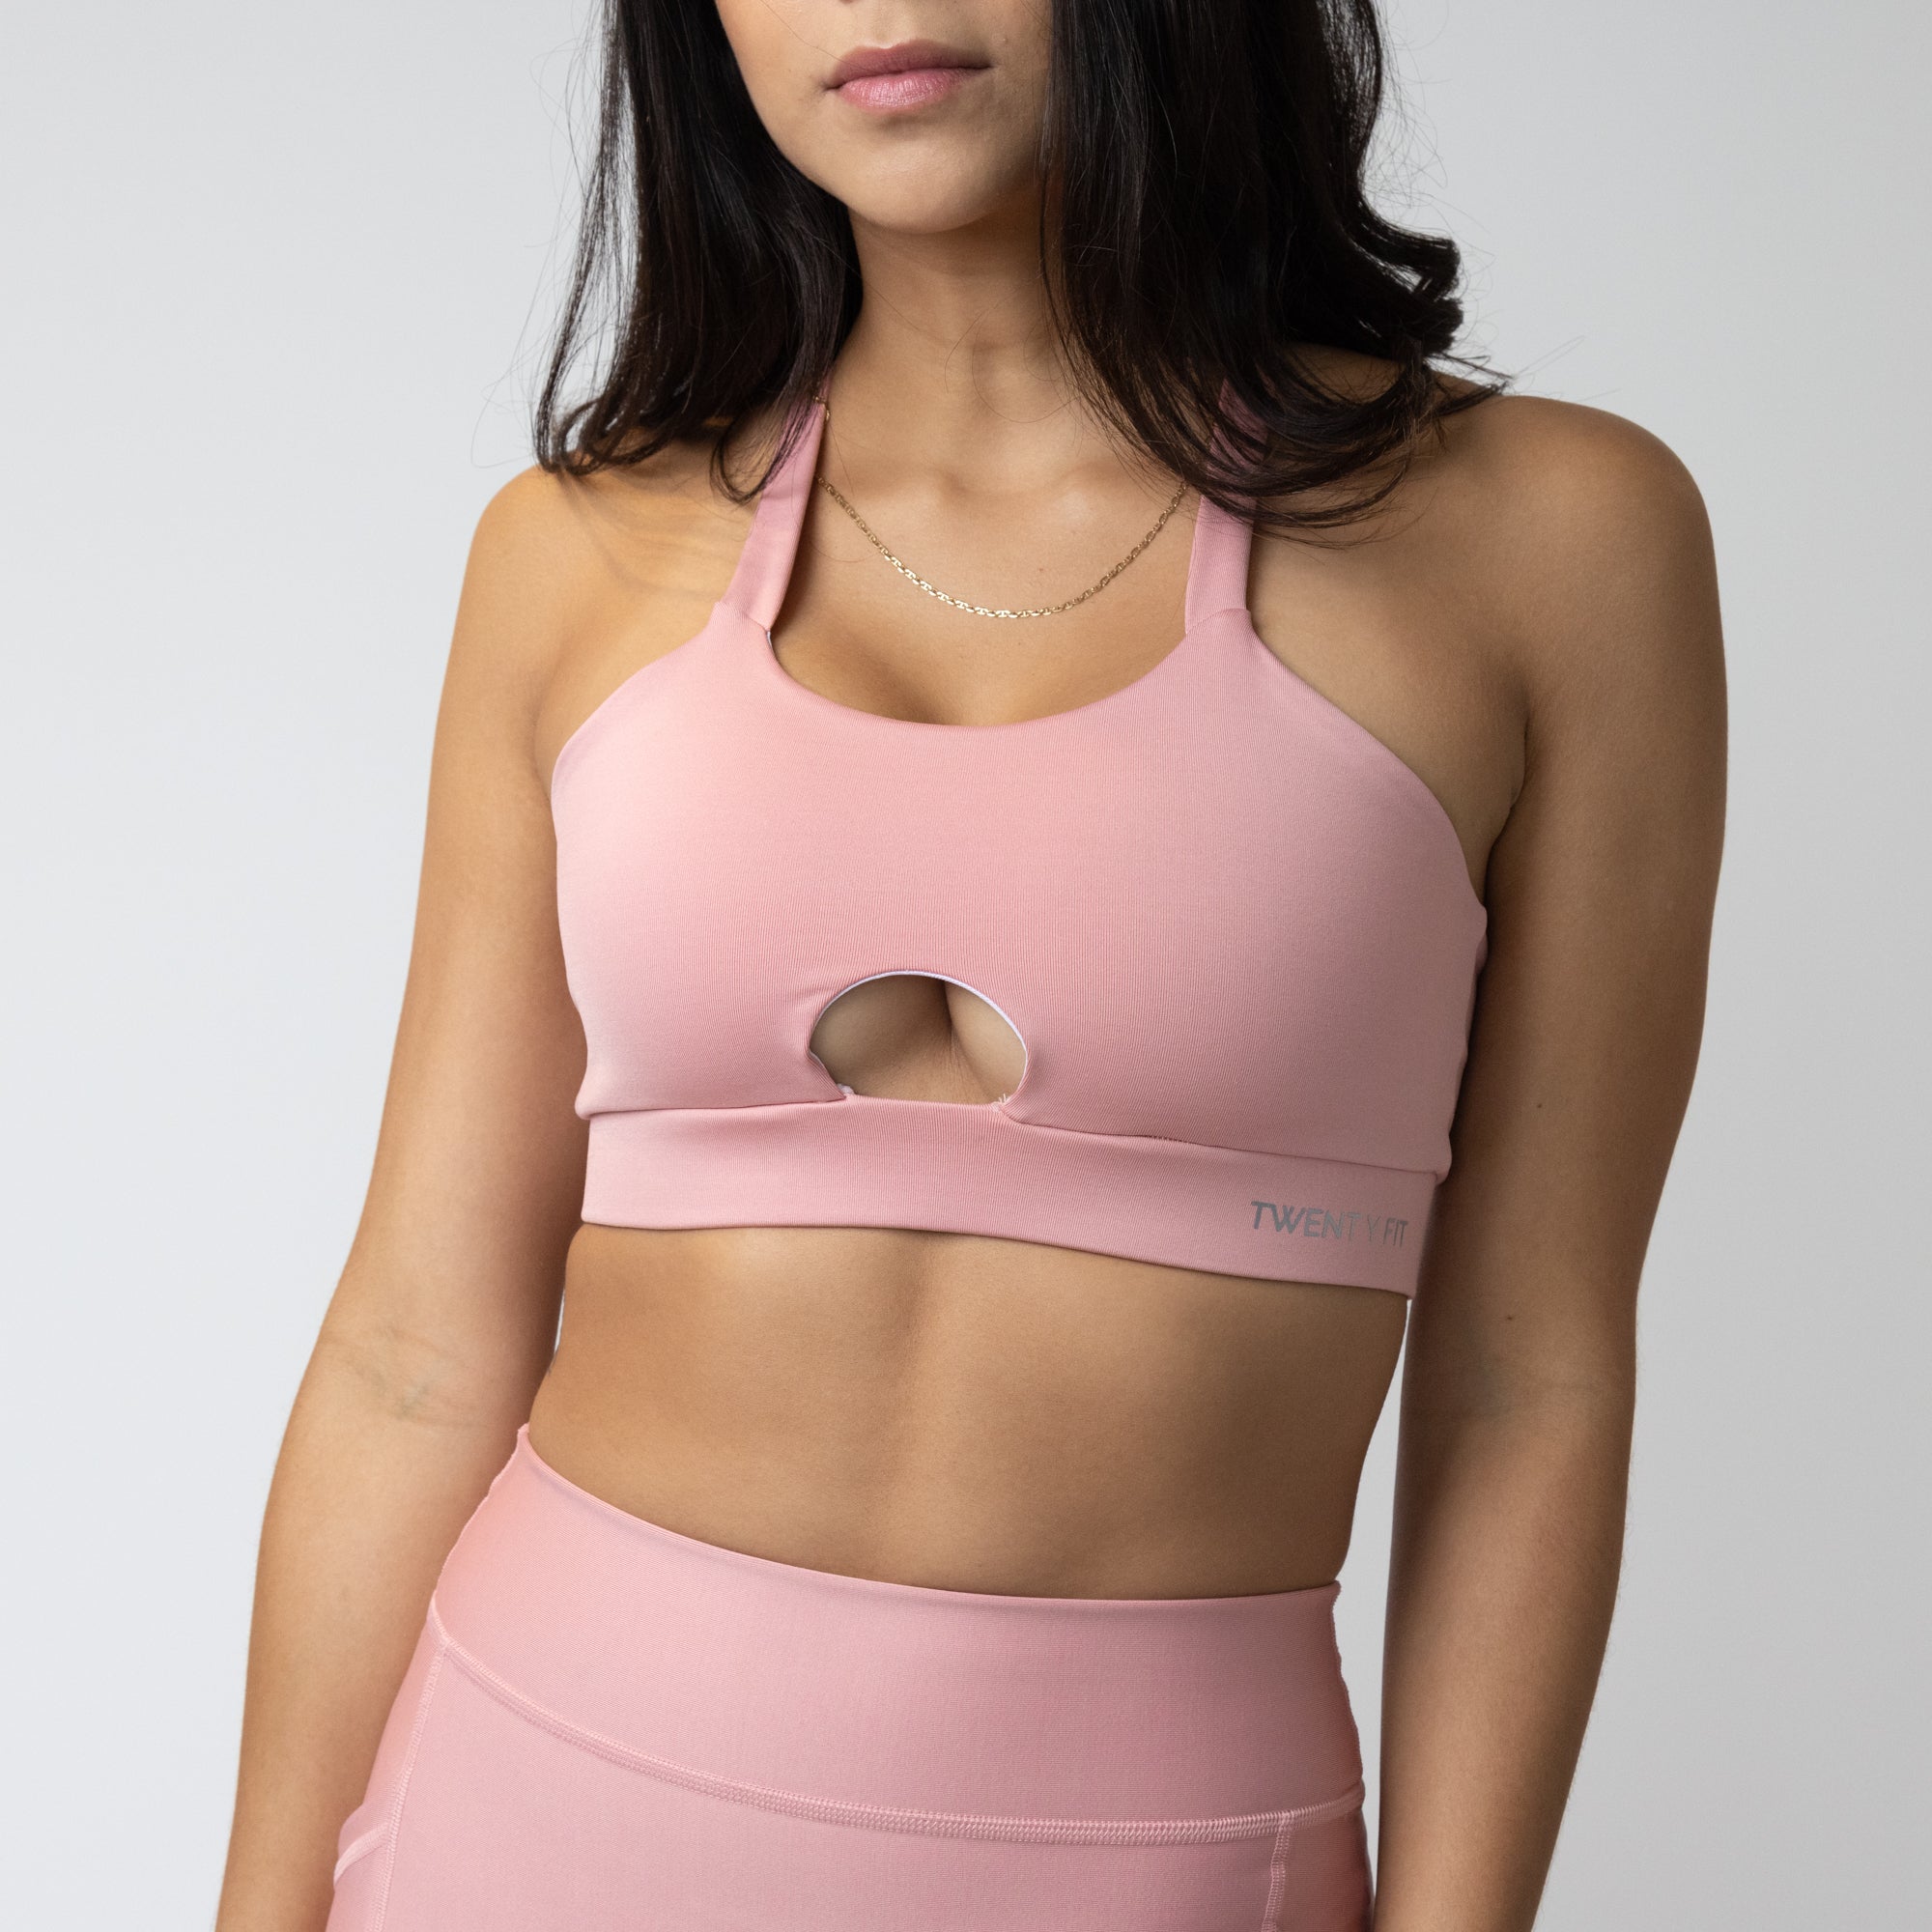 Pink sports bra makes it look like you have constant underboob sweat :  r/CrappyDesign